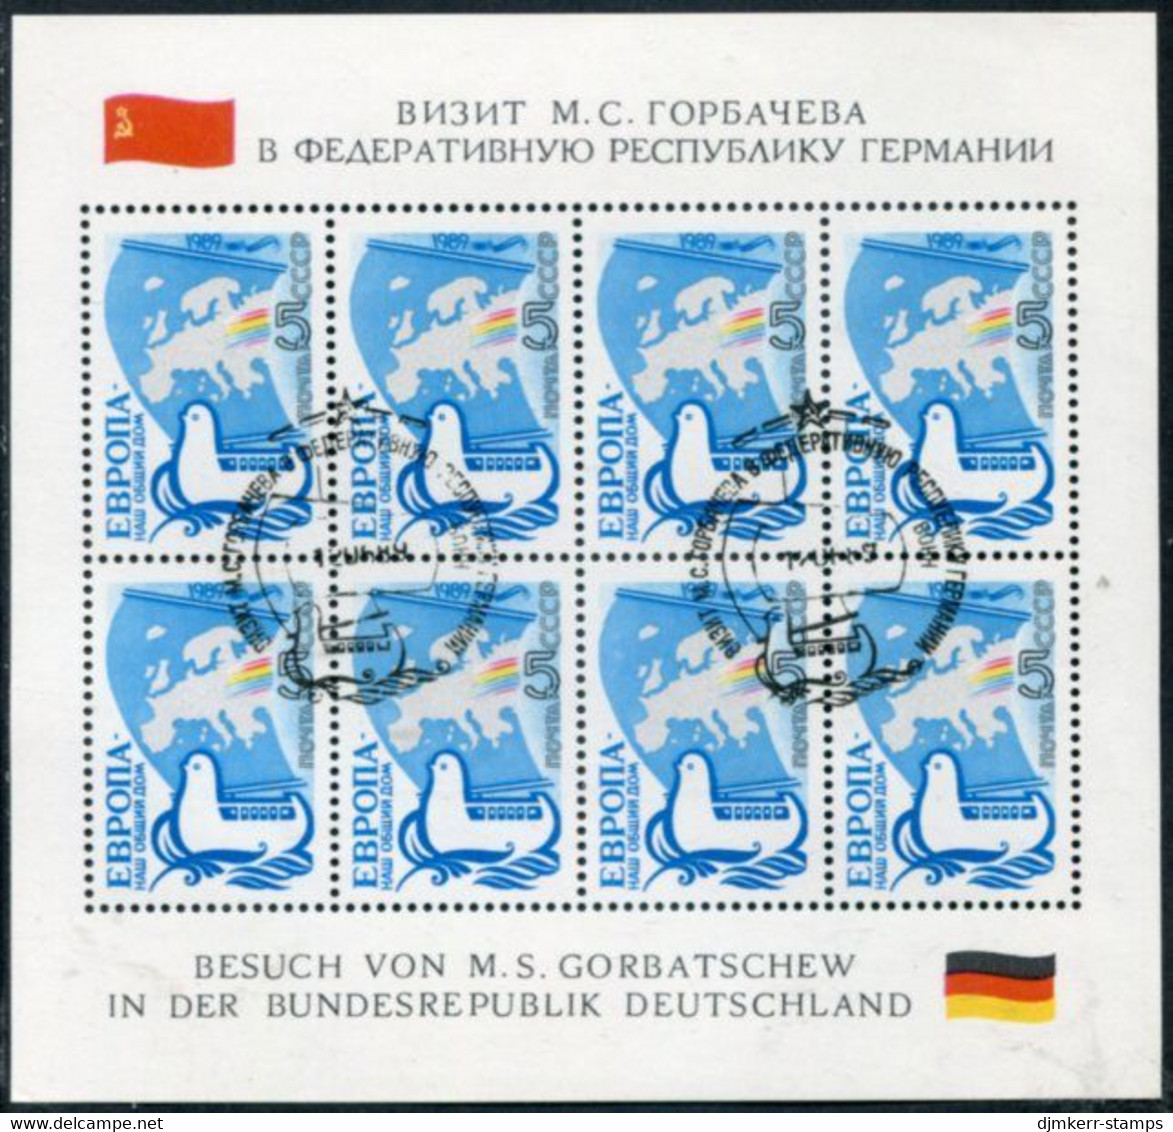 SOVIET UNION 1989 Europa: Our Common Home Sheetlet Used.  Michel 5955 Kb - Blocs & Hojas